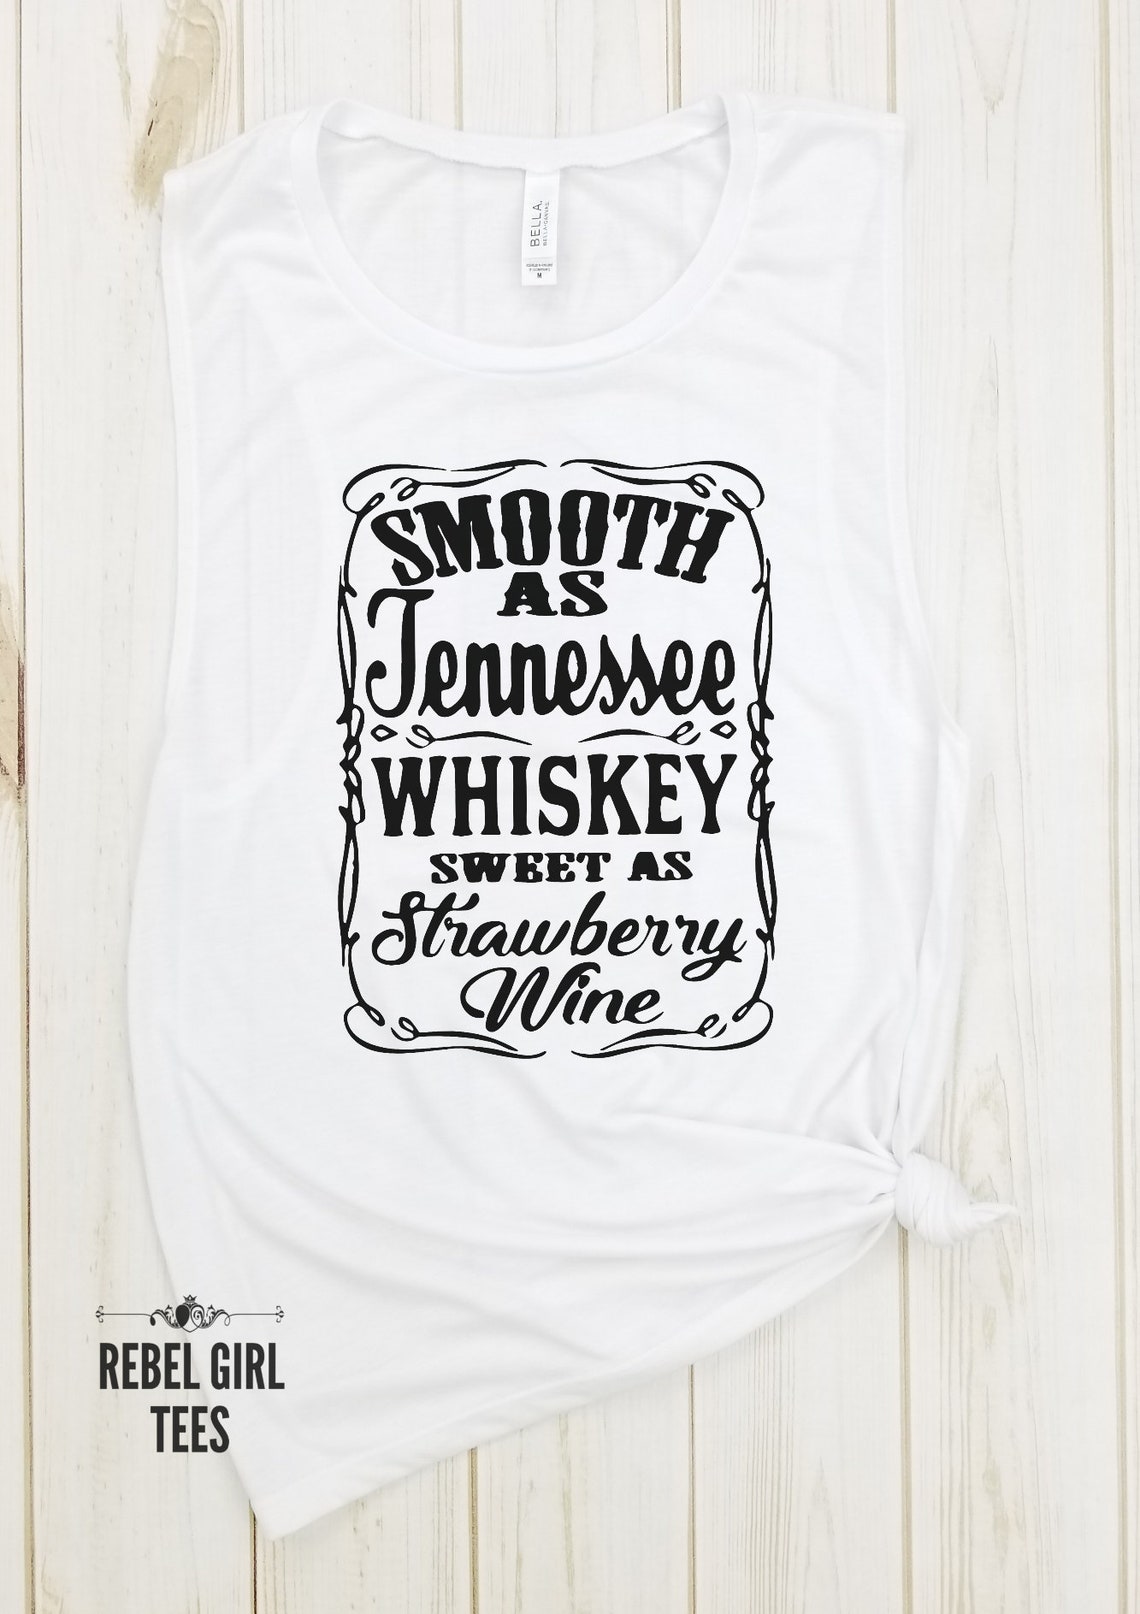 Smooth as Tennessee Whiskey Sweet as Strawberry Wine Country - Etsy